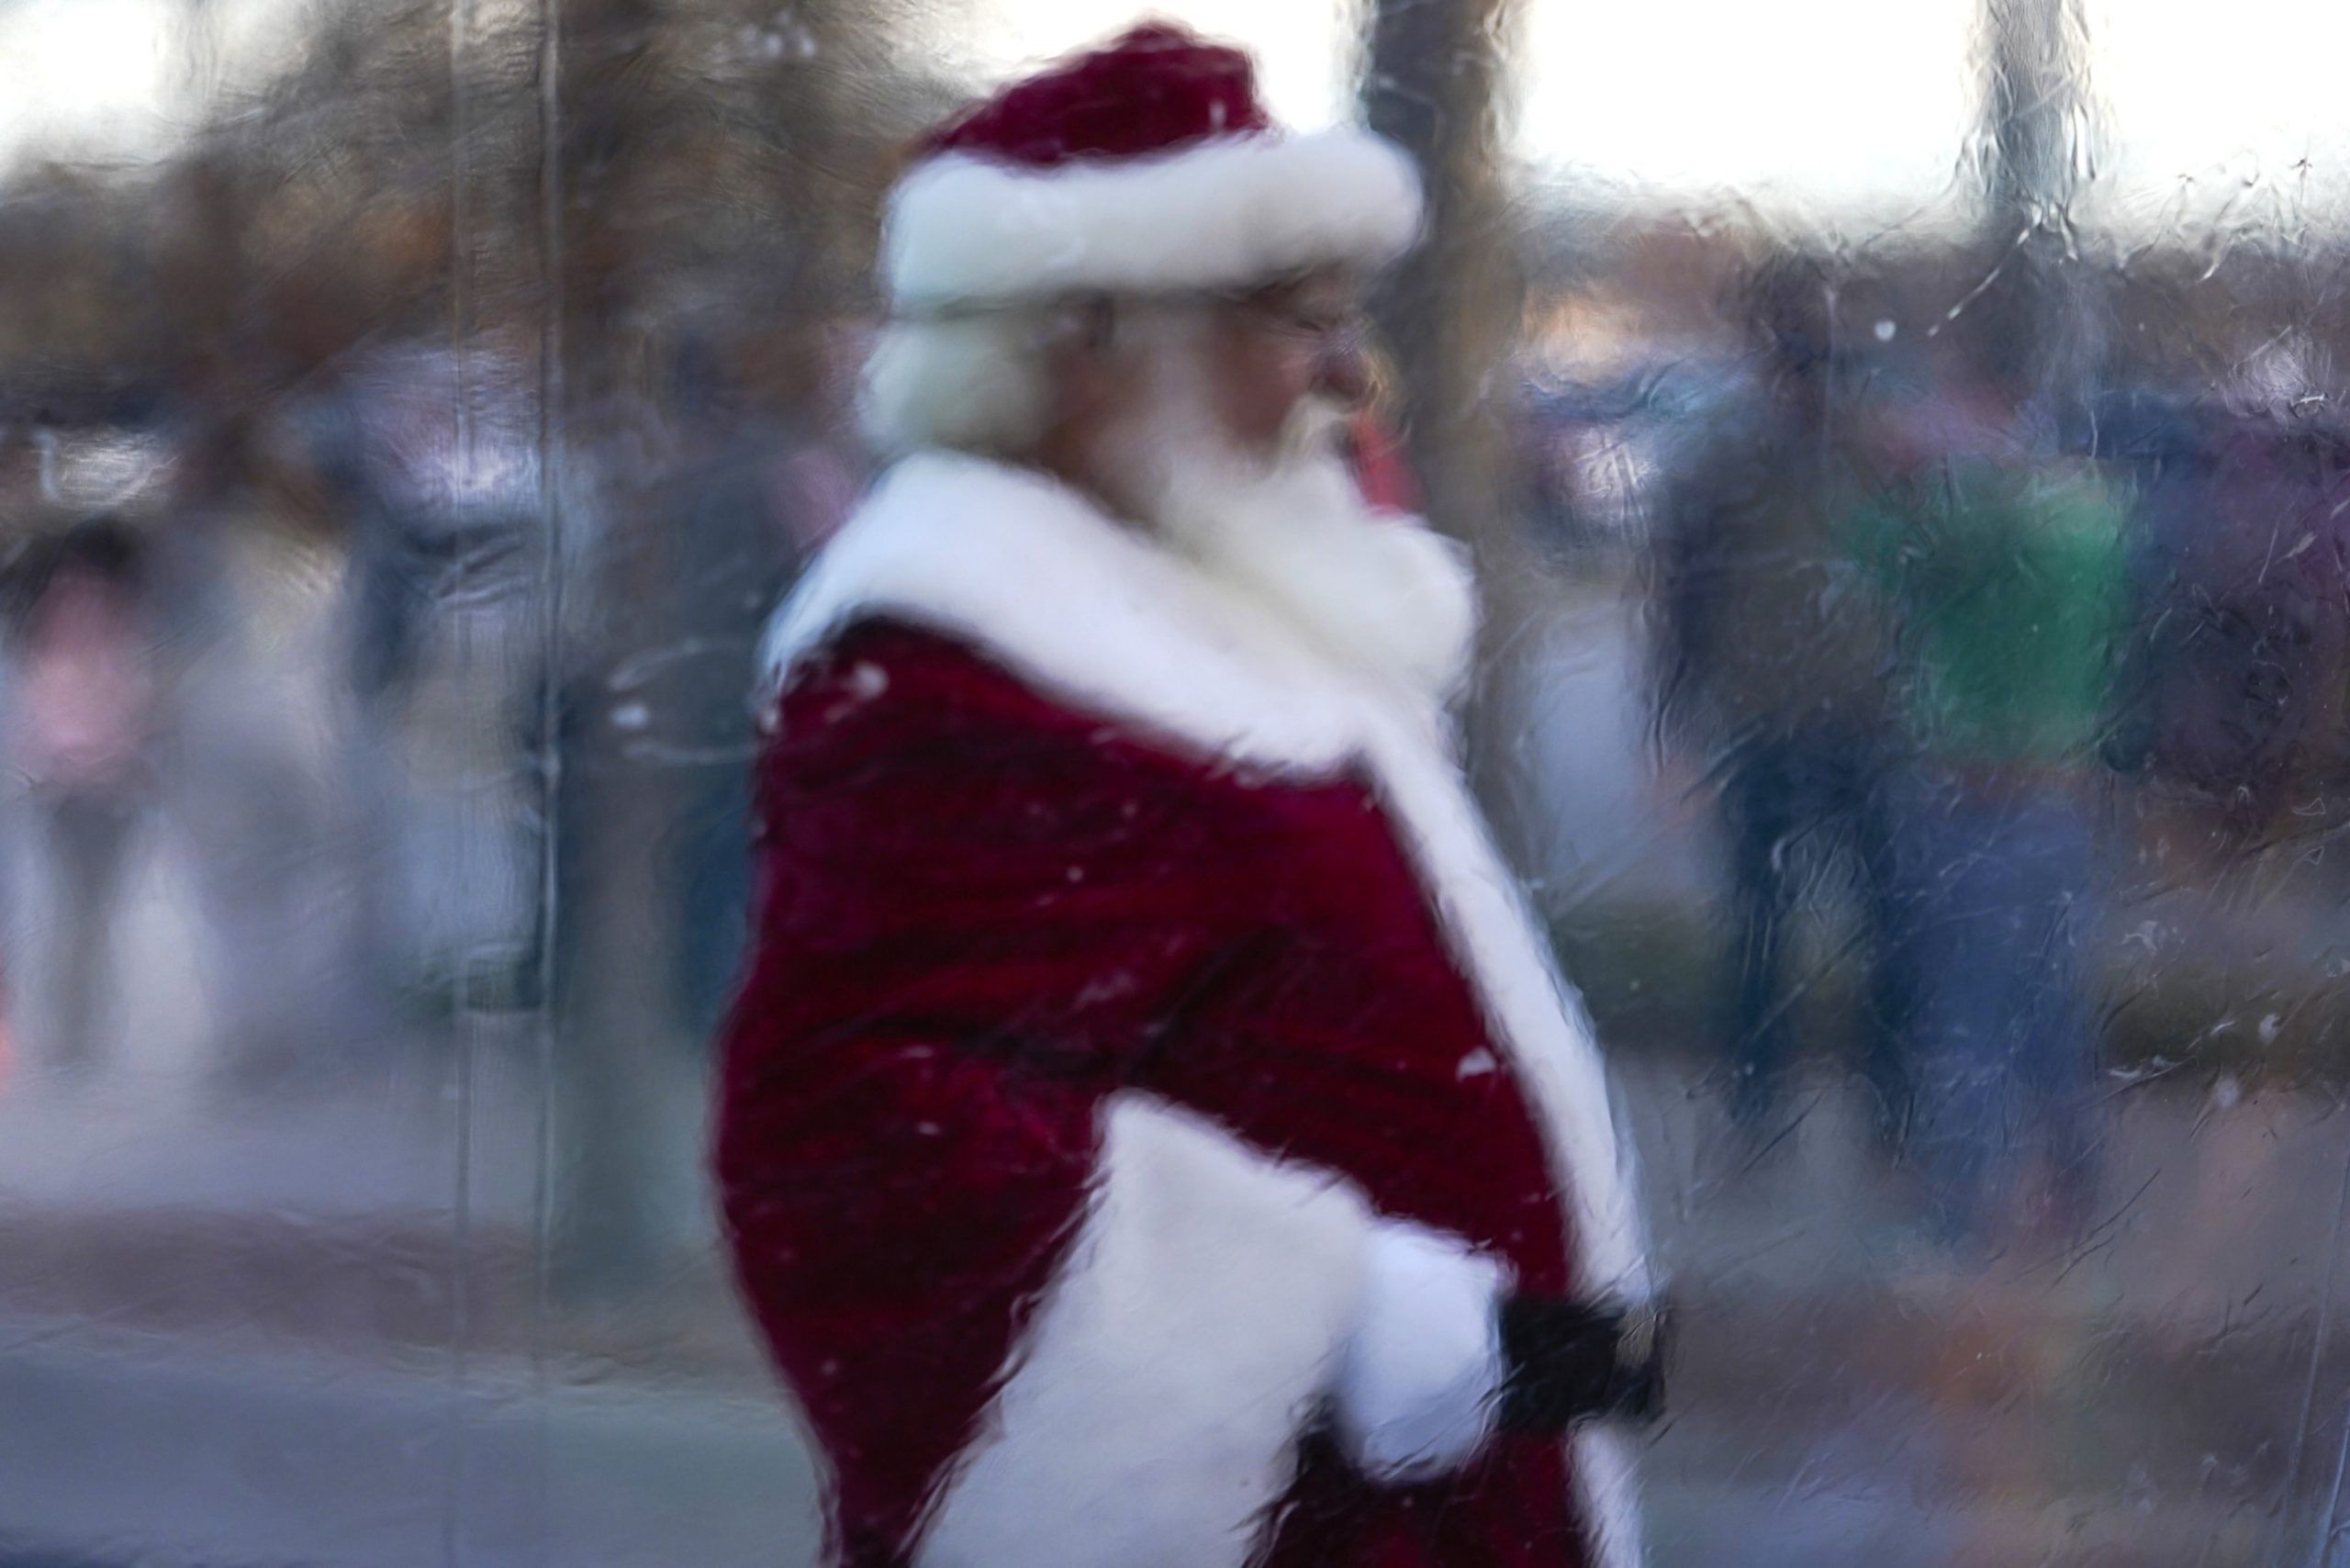 A performer dressed as Santa Claus greets a children from inside a bubble during the Lights on Broadway event in Oklahoma City, Oklahoma, U.S., on Saturday, Dec. 5, 2020. With Covid cases rising in the U.S., the job of playing Santa has pivoted for health safety. Photographer: Nick Oxford/Bloomberg